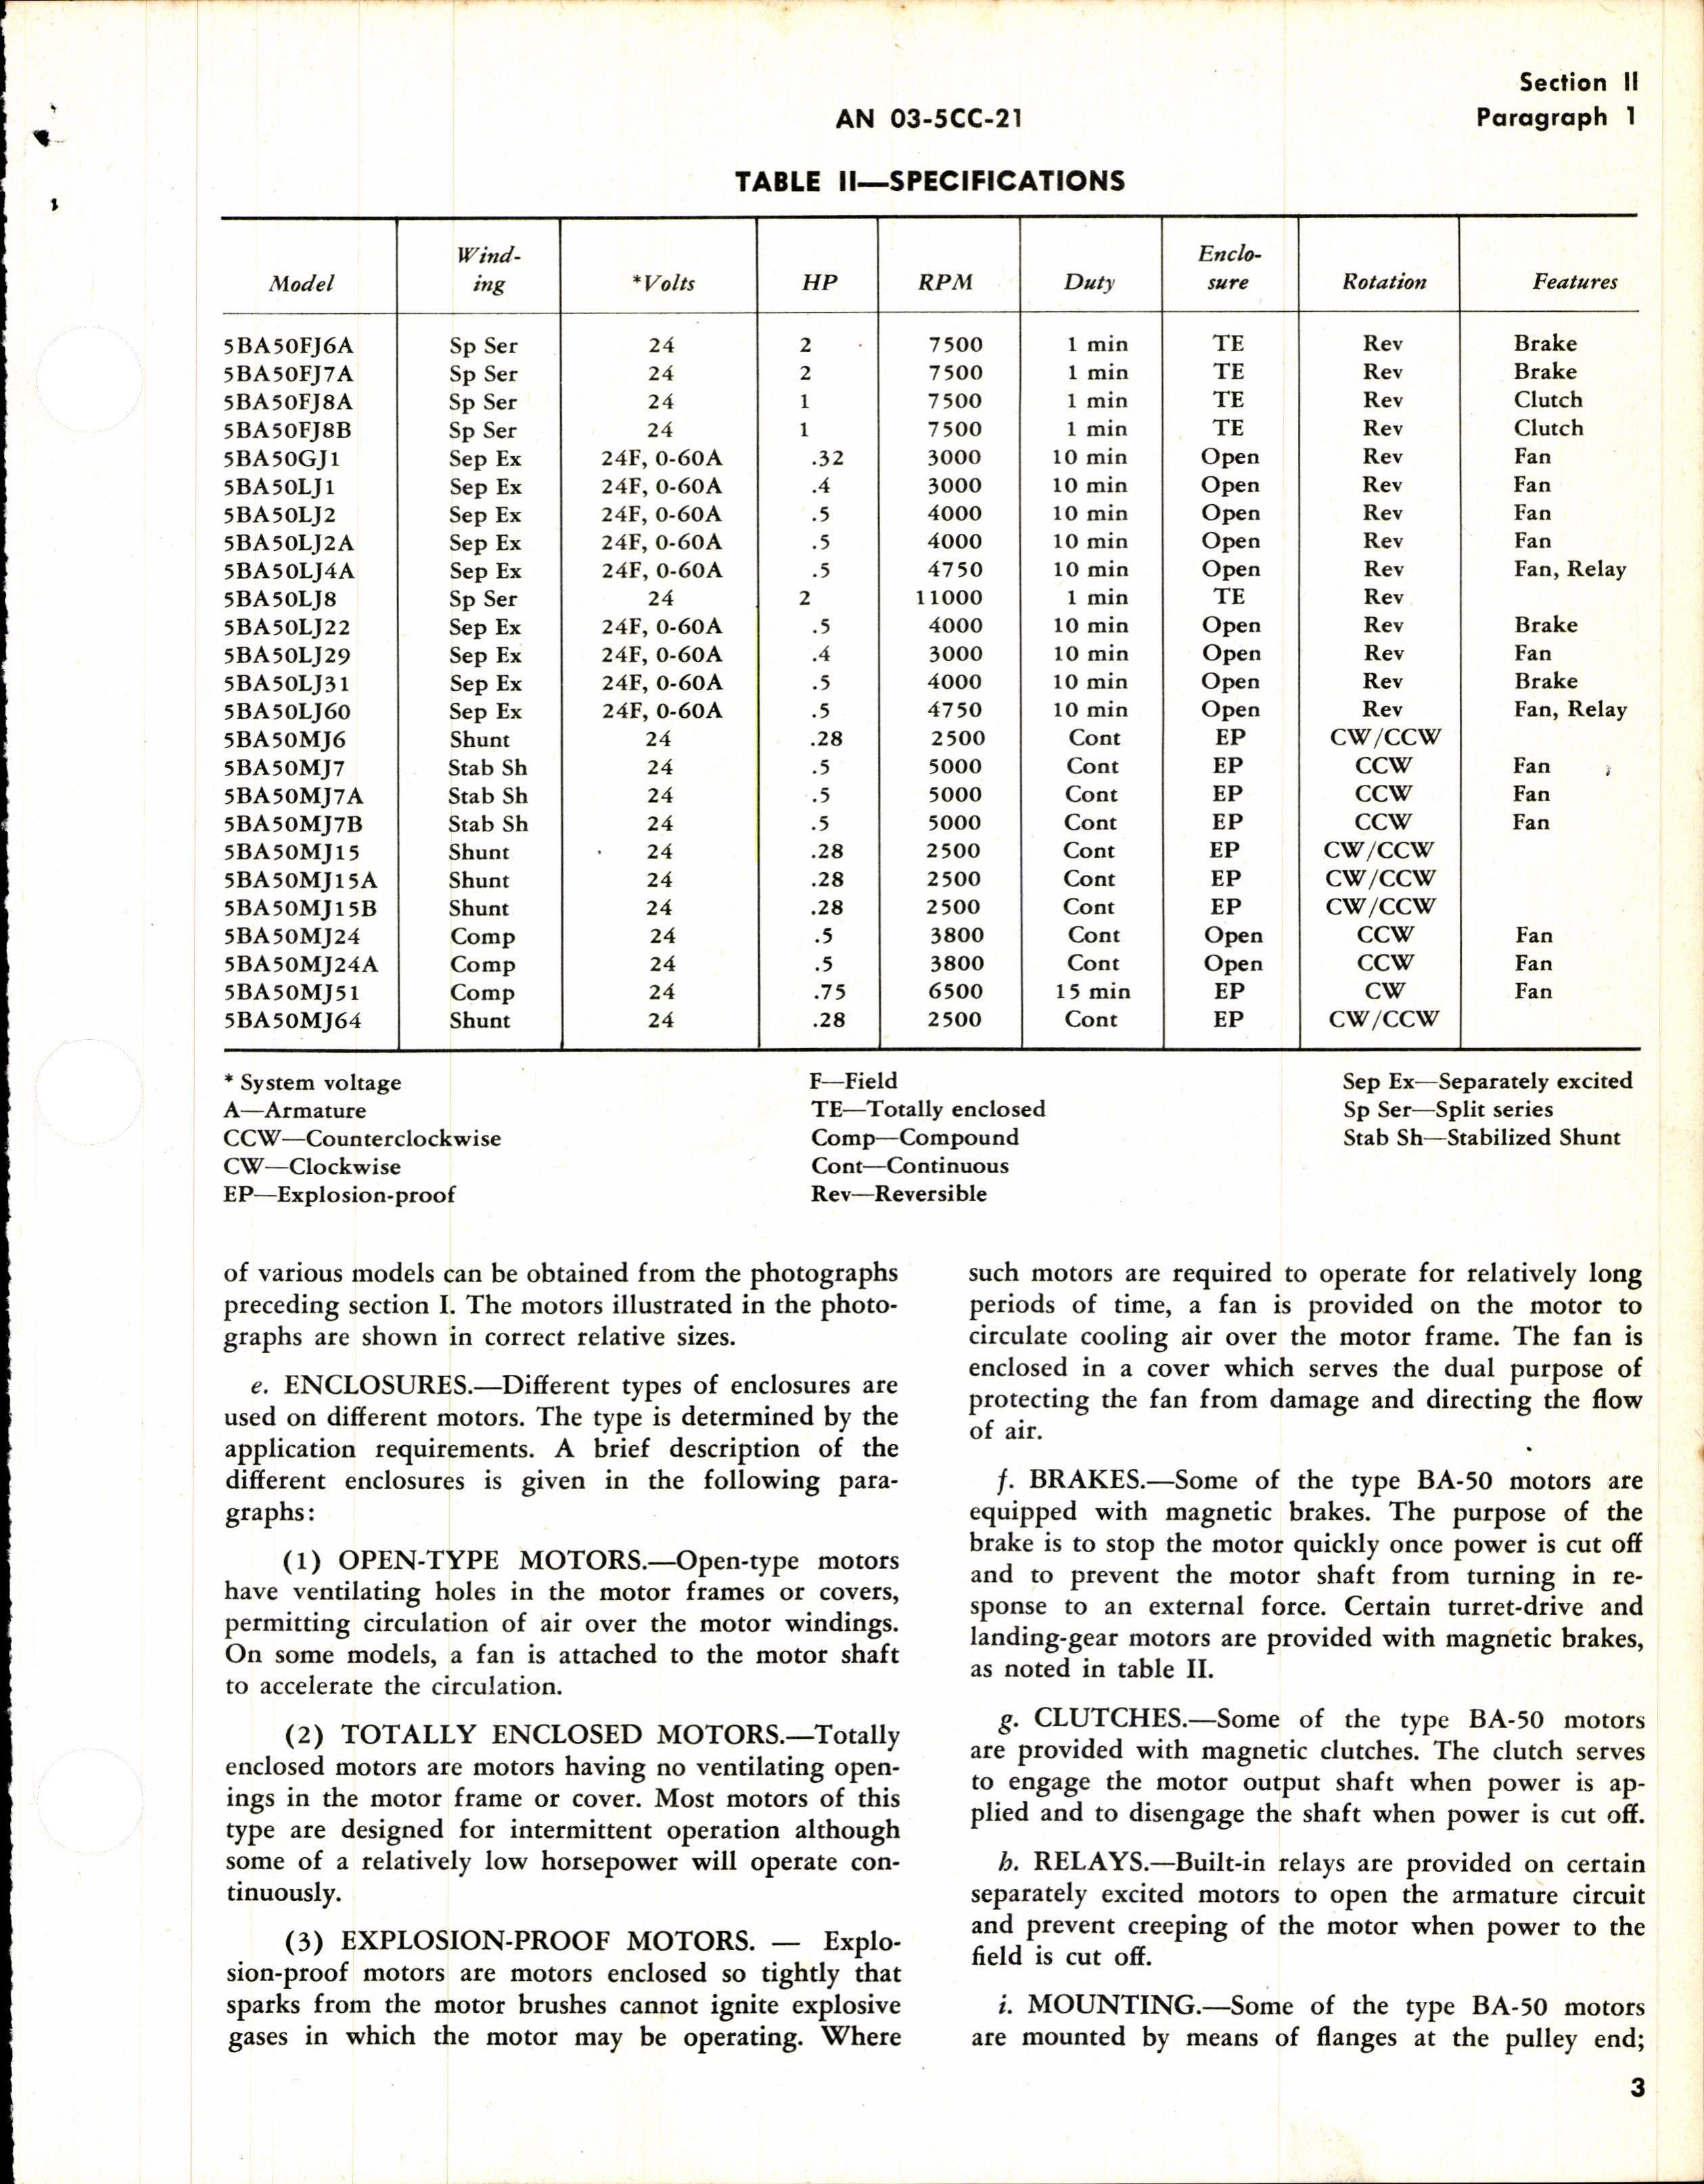 Sample page 5 from AirCorps Library document: HB of Instructions with Parts Catalog for Model 5BA50 Electric Motor